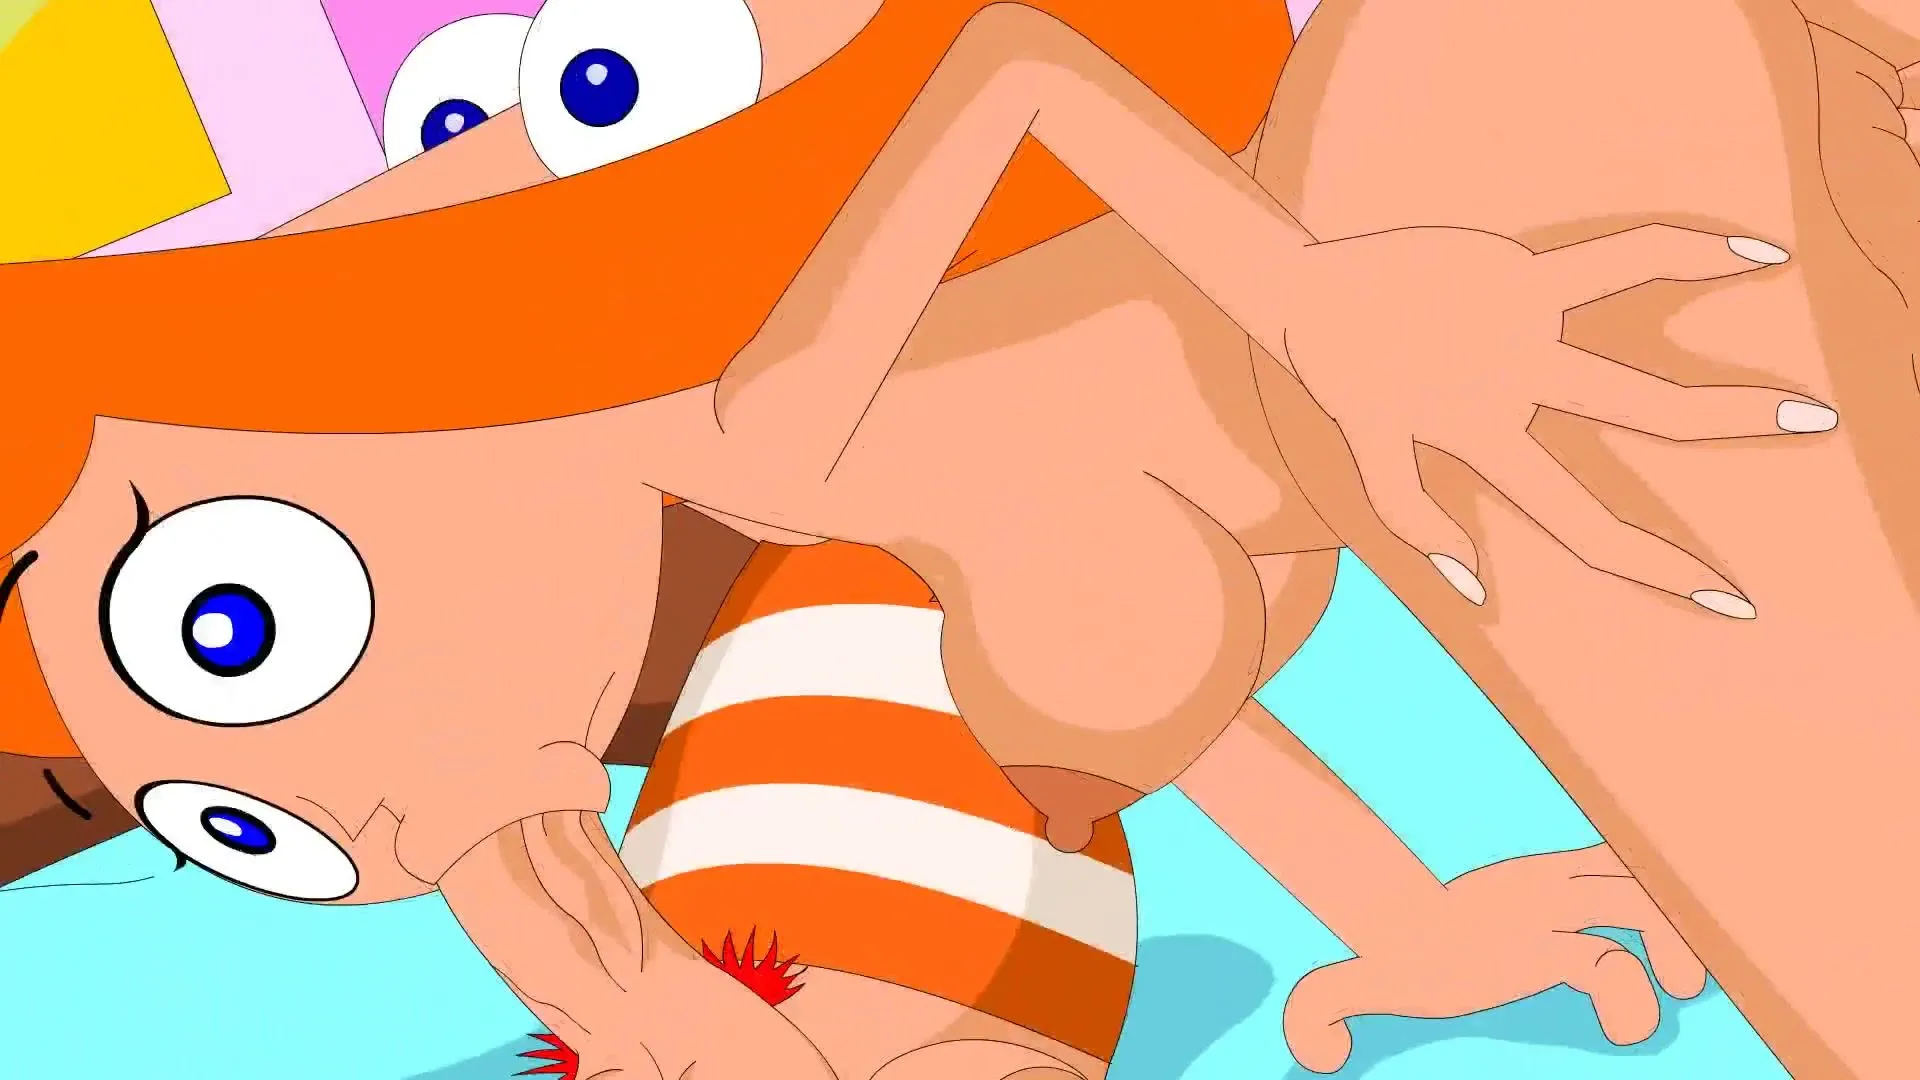 Candice Cartoon Nude - Candace Flynn fucks Phineas & Ferb in 3some